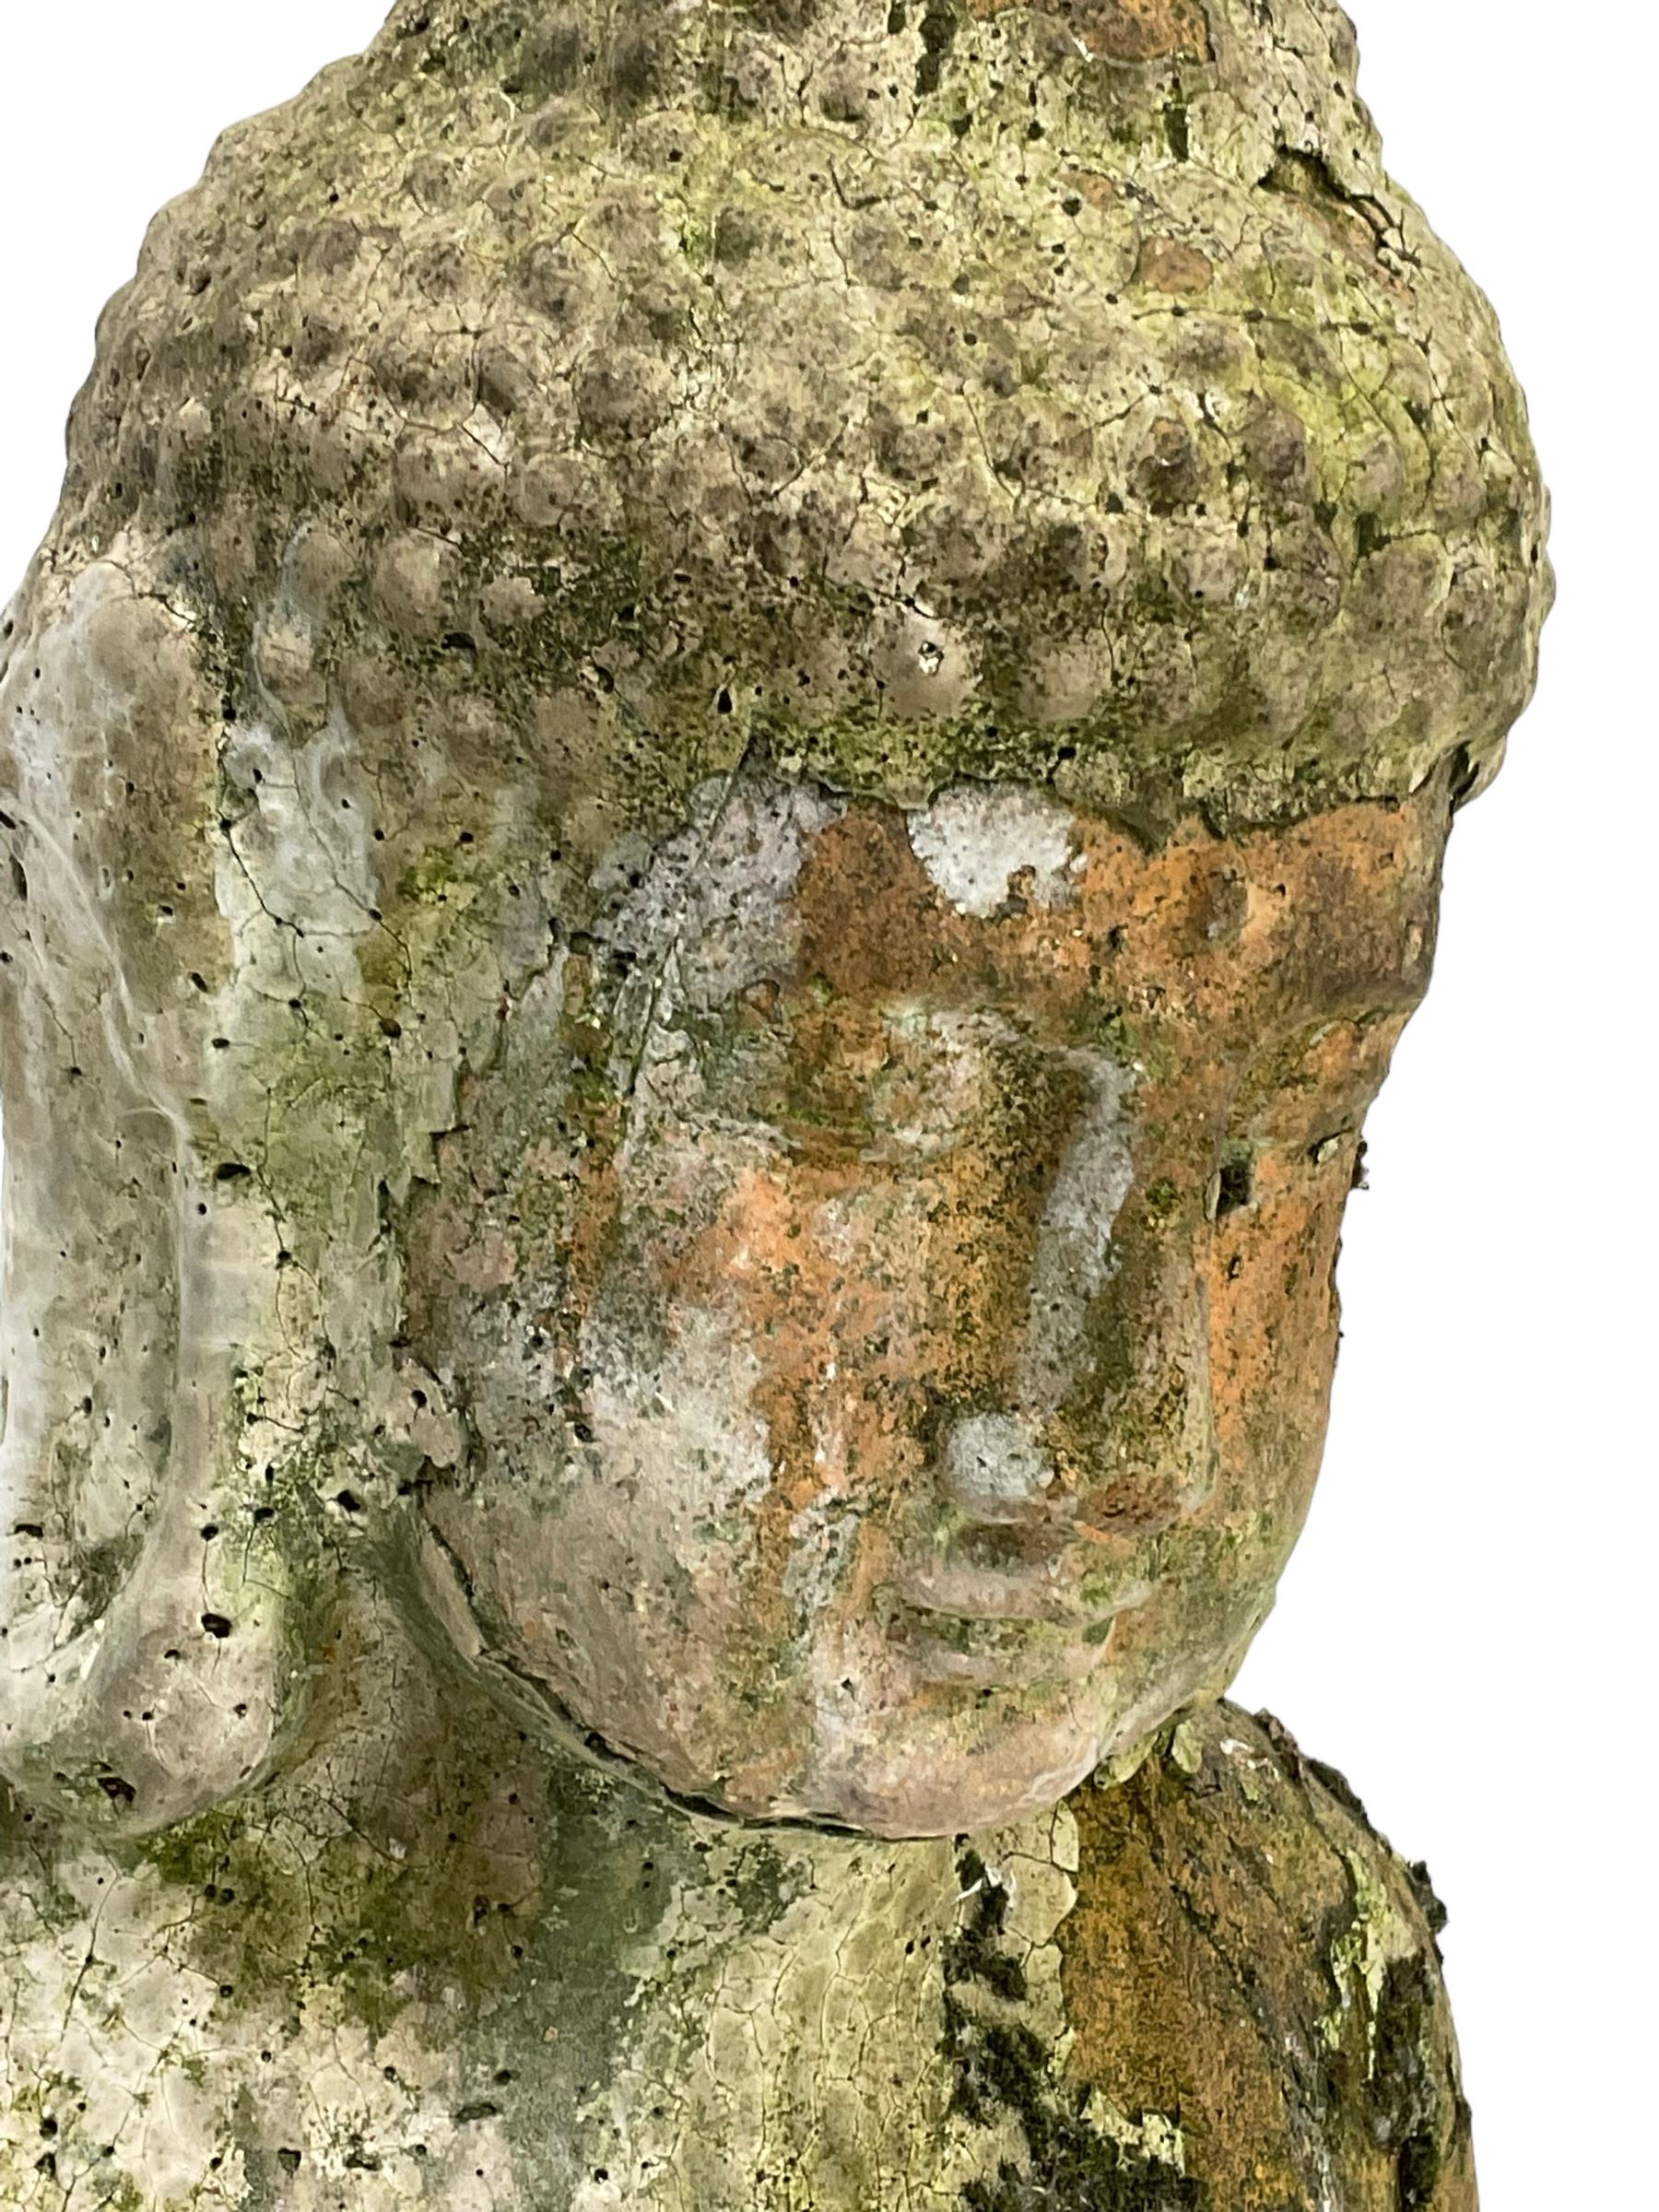 Terracotta garden figure in the form of a seated Buddha - Image 3 of 6